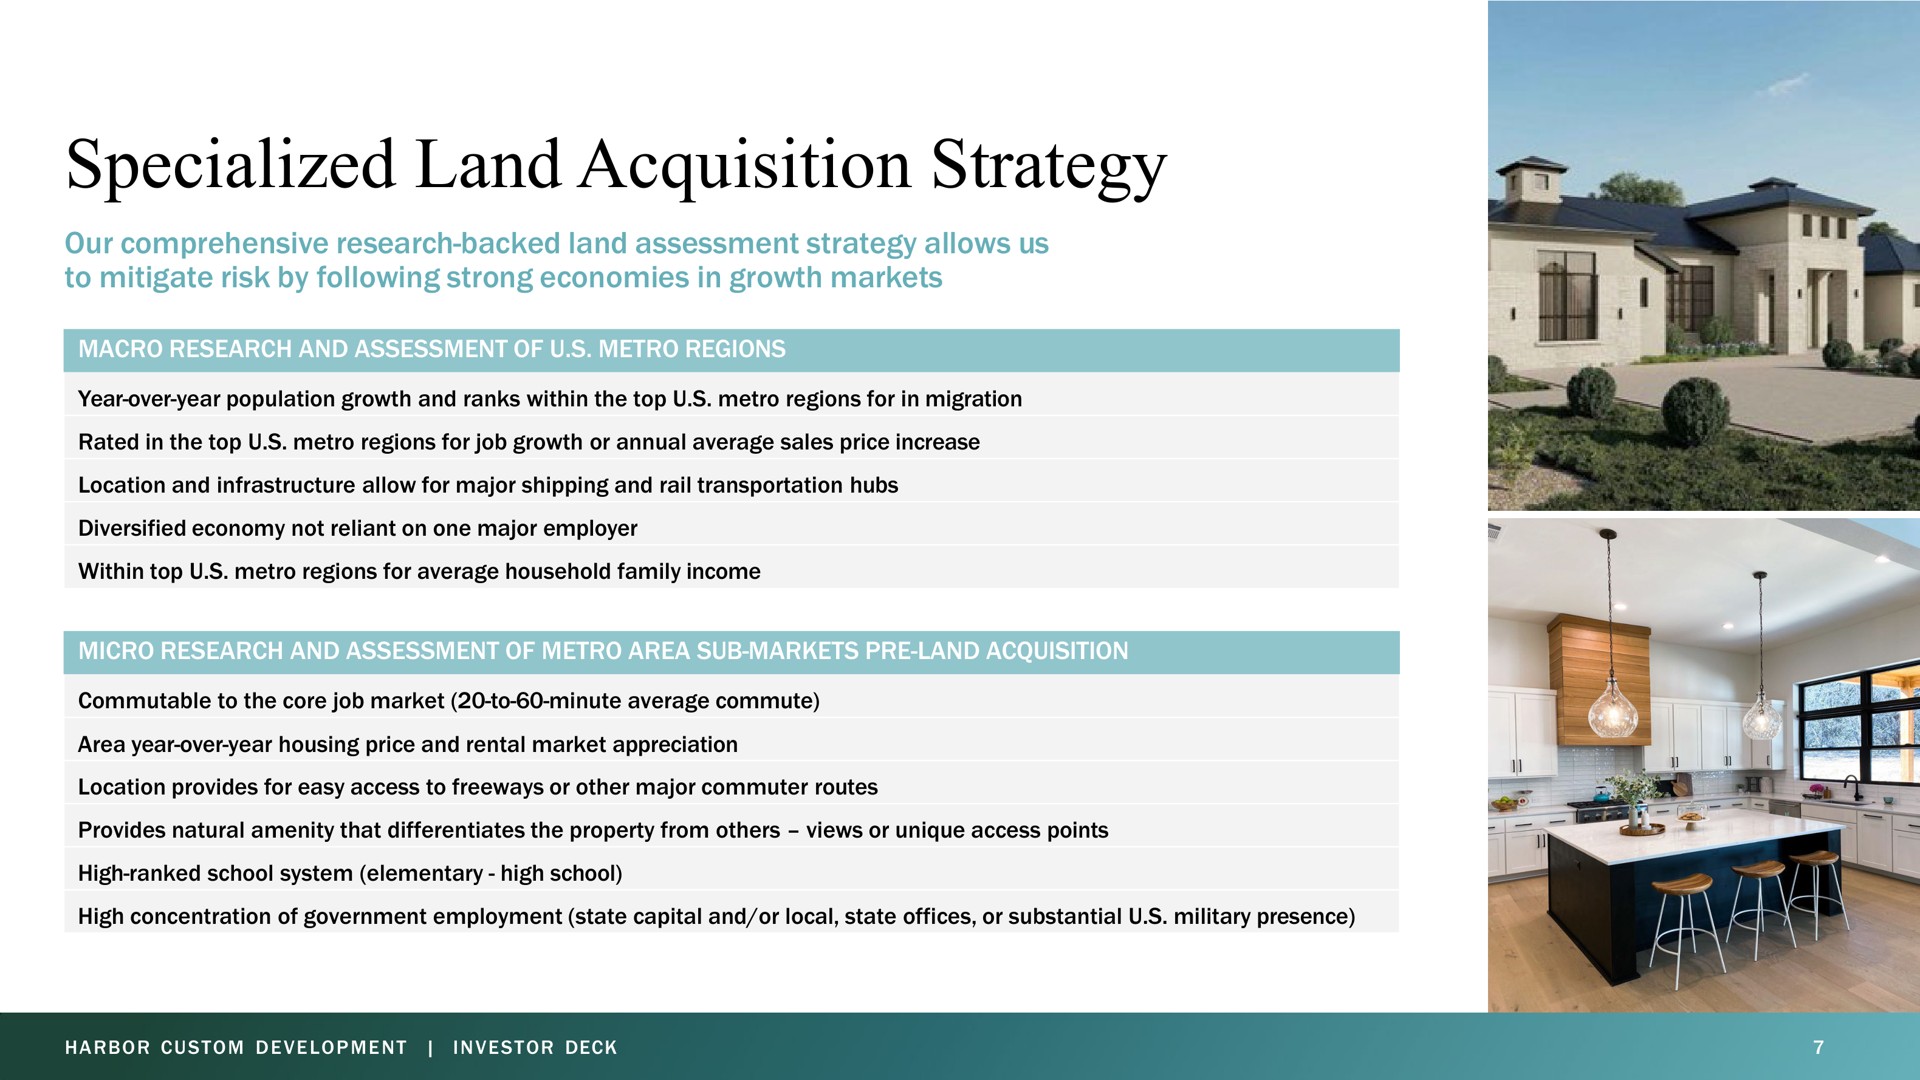 specialized land acquisition strategy our comprehensive research backed land assessment strategy allows us to mitigate risk by following strong economies in growth markets macro research and assessment of regions year over year population growth and ranks within the top regions for in migration rated in the top regions for job growth or annual average sales price increase location and infrastructure allow for major shipping and rail transportation hubs diversified economy not reliant on one major employer within top regions for average household family income micro research and assessment of area sub markets land acquisition commutable to the core job market to minute average commute area year over year housing price and rental market appreciation location provides for easy access to freeways or other major commuter routes provides natural amenity that differentiates the property from views or unique access points high ranked school system elementary high school high concentration of government employment state capital and or local state offices or substantial military presence | Harbor Custom Development